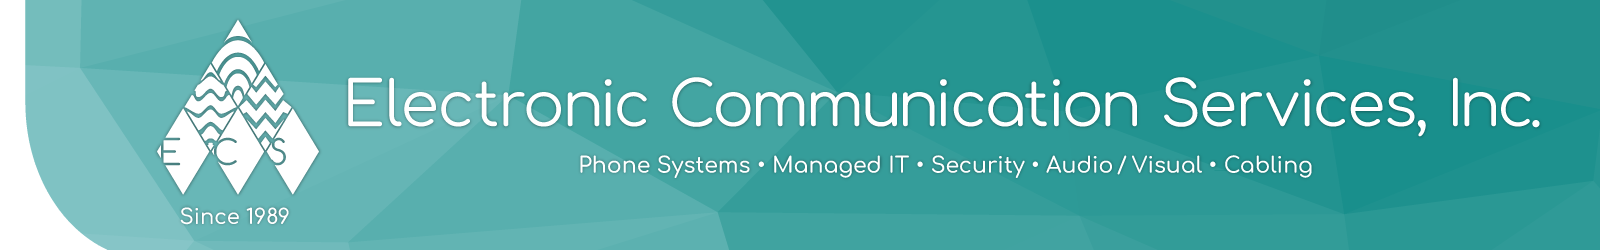 Interactive Solutions + Managed IT - Electronic Communication Services